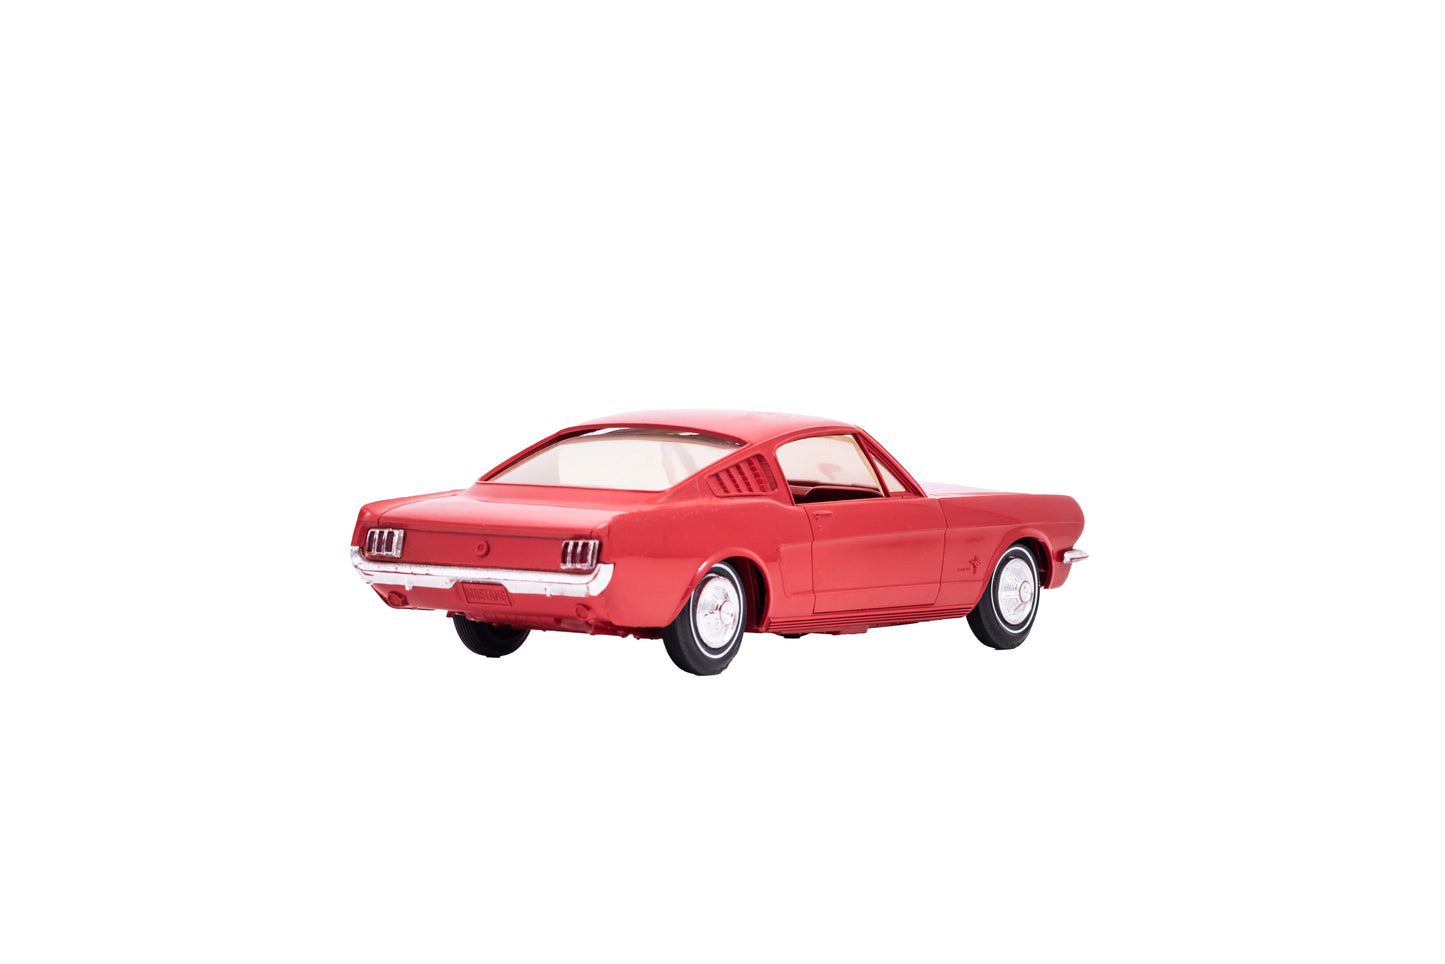 1966 Mustang Fastback Ford Dealer Promo Model from AMT